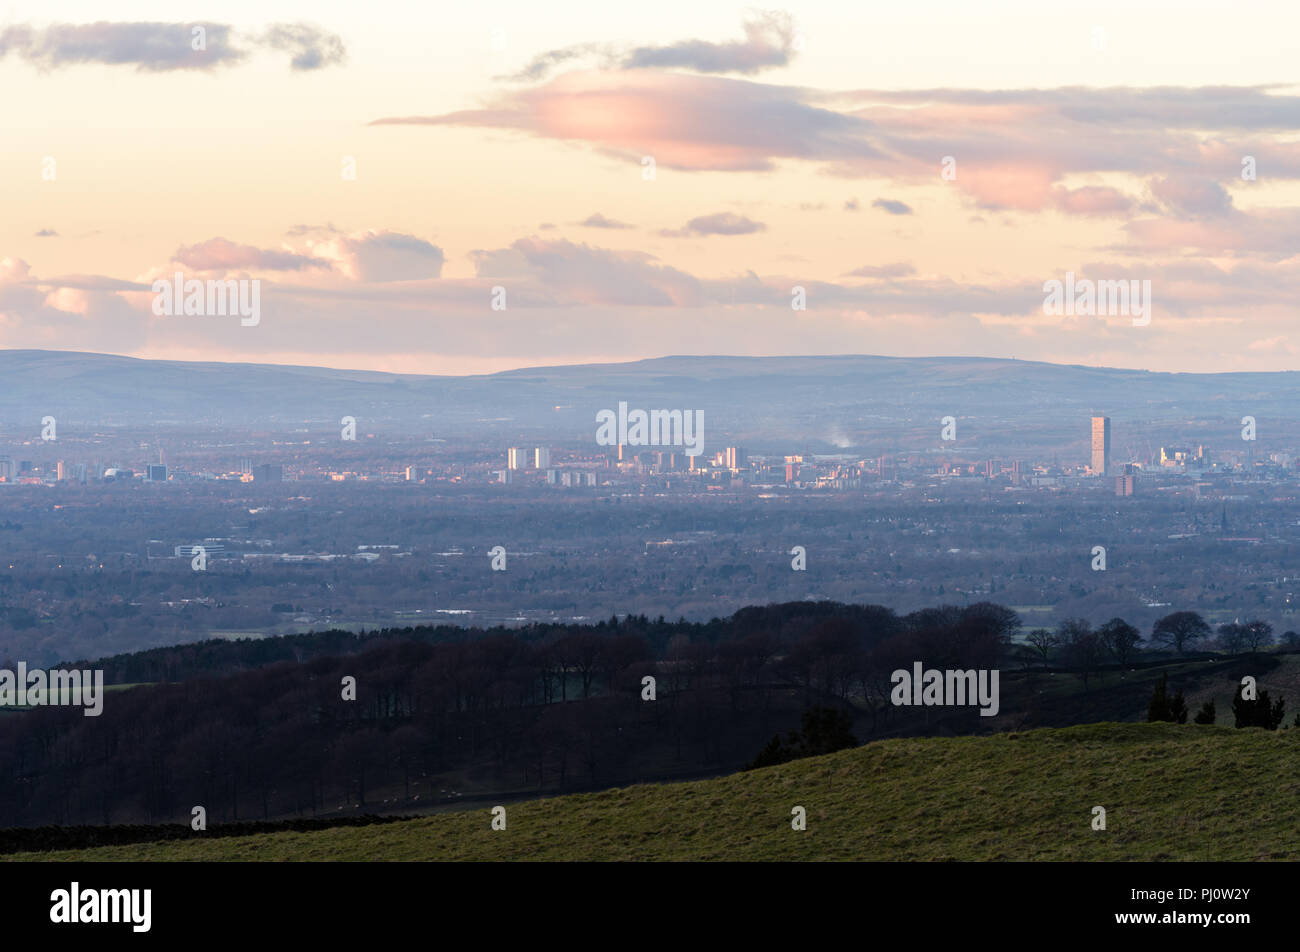 Far away view of Manchester from Rainow in Macclesfield, showing The Hilton hotel (Beetham Tower) at sunset Stock Photo